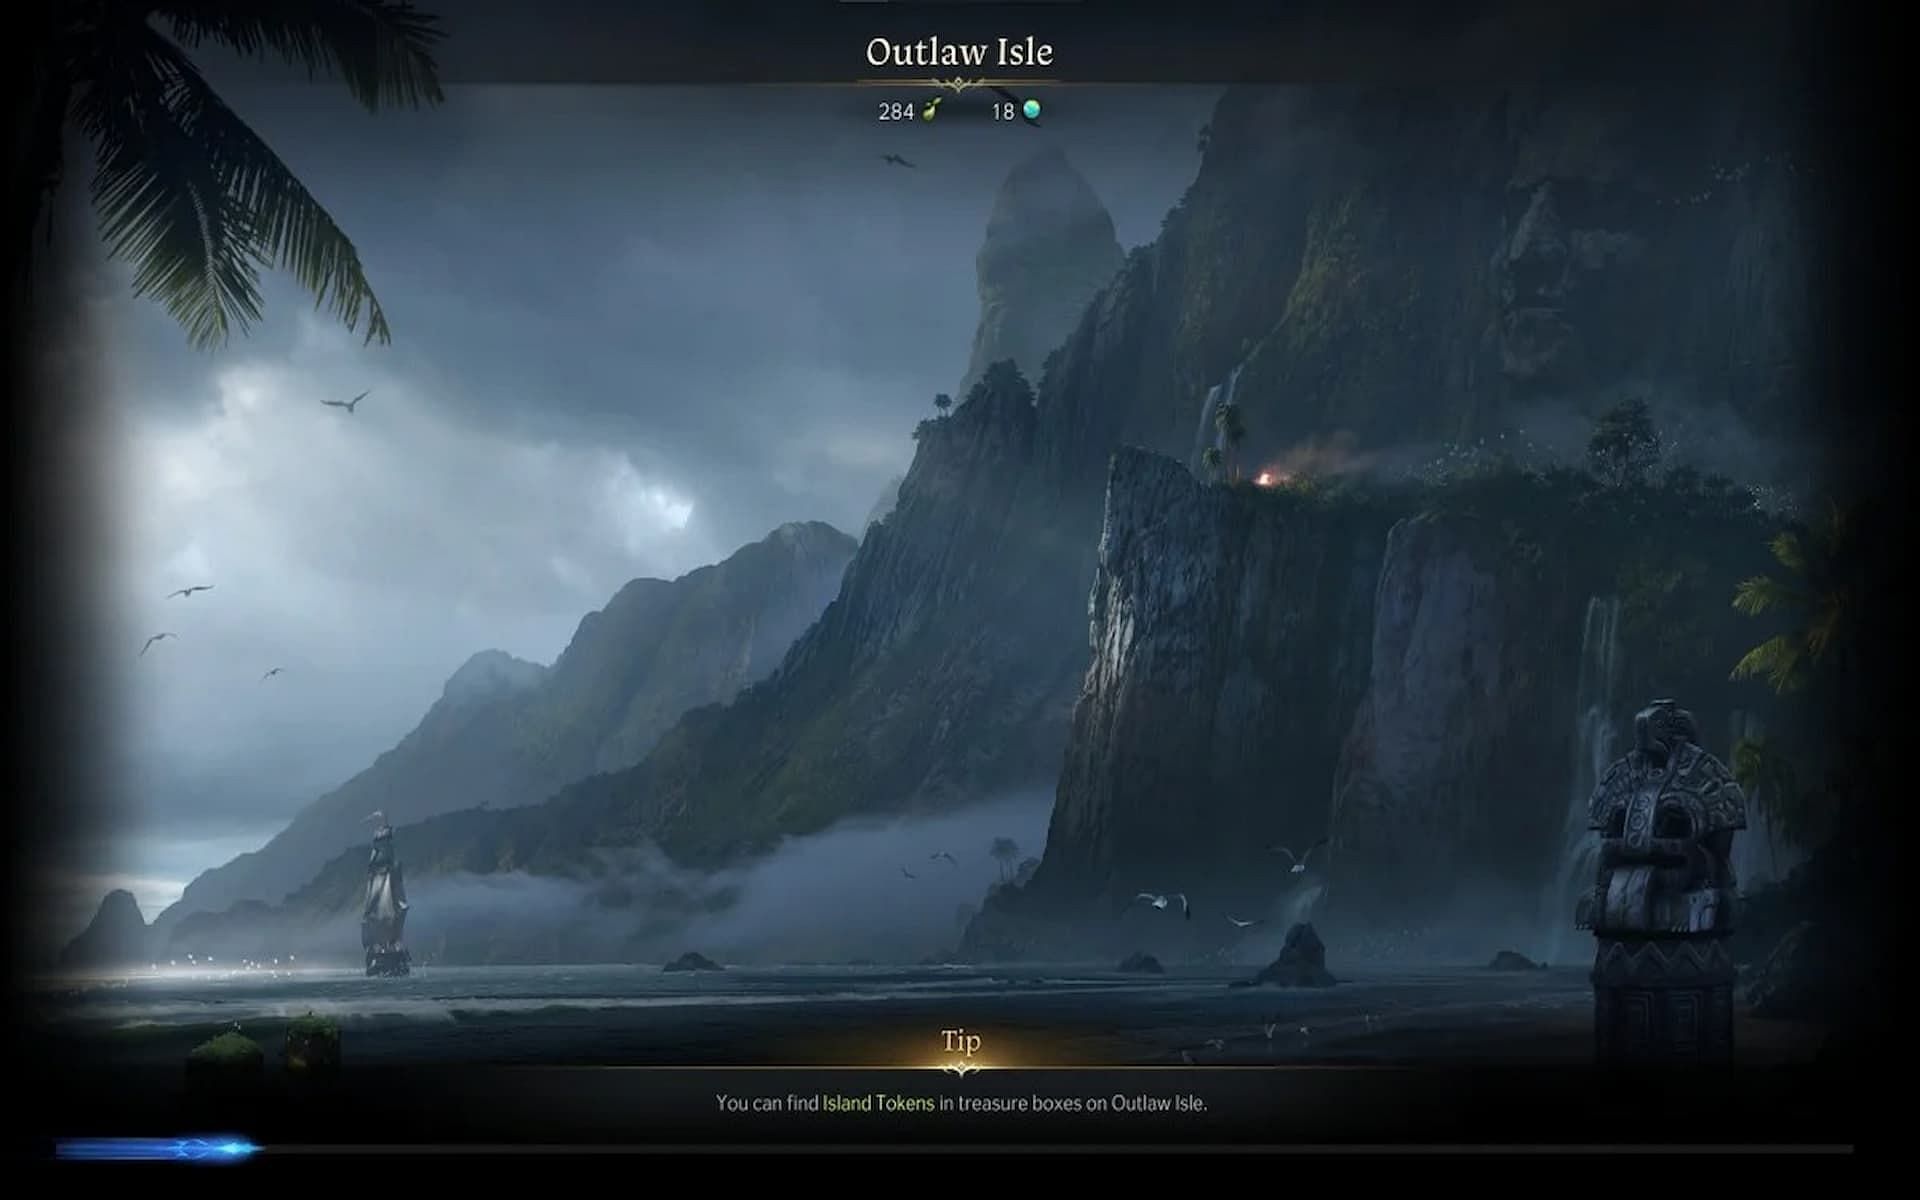 Outlaw Isle is one of many islands in Lost Ark (Image via Smilegate)